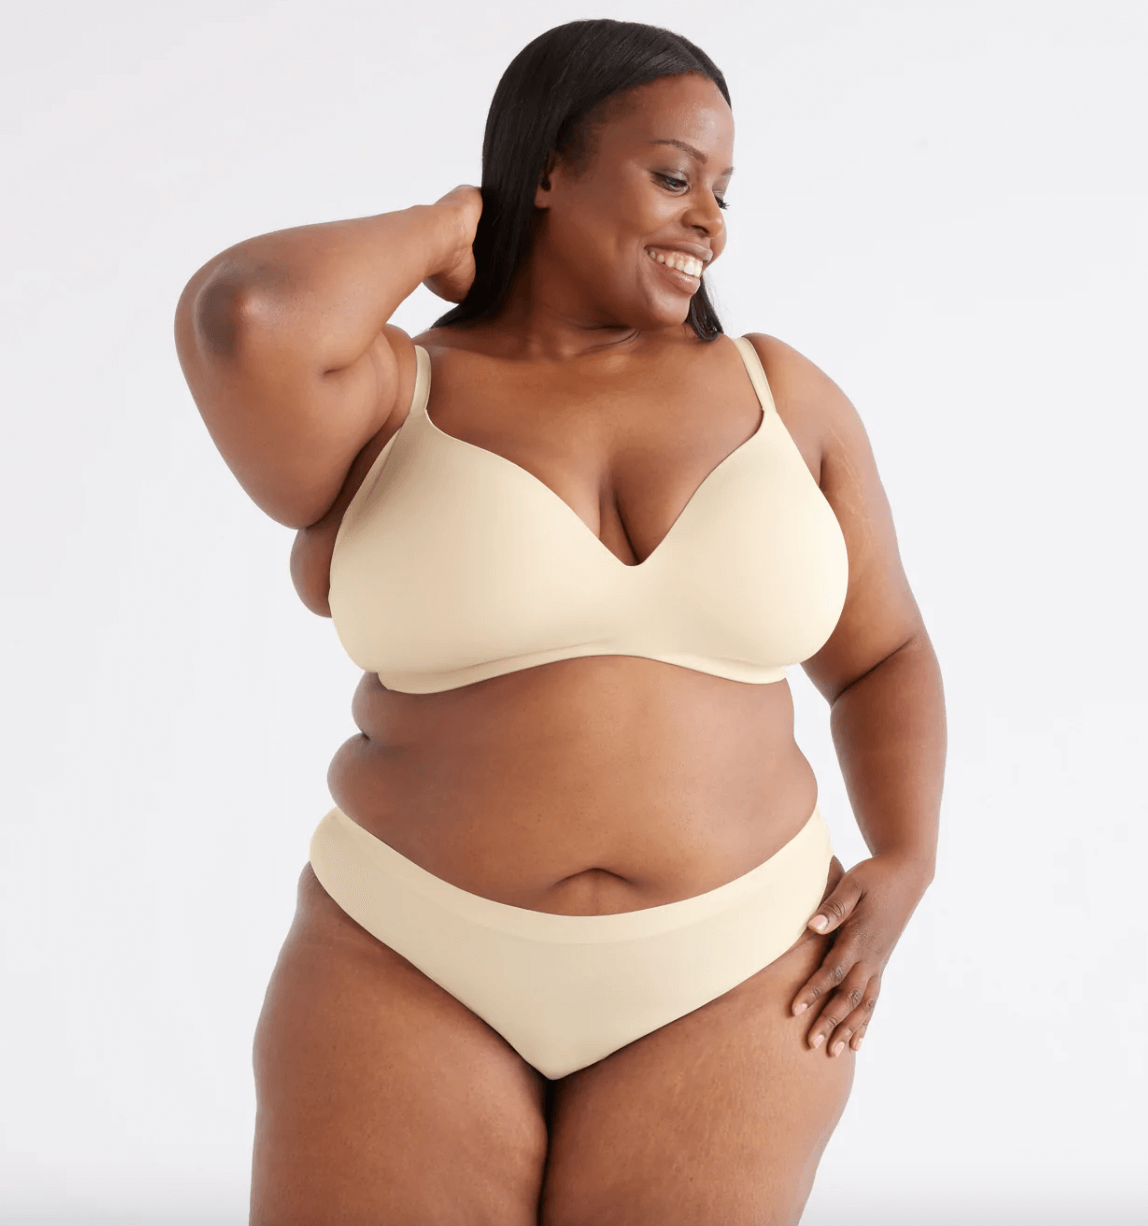 The Best Bras for Large Busts That Accommodate DD+ Sizes in 2021